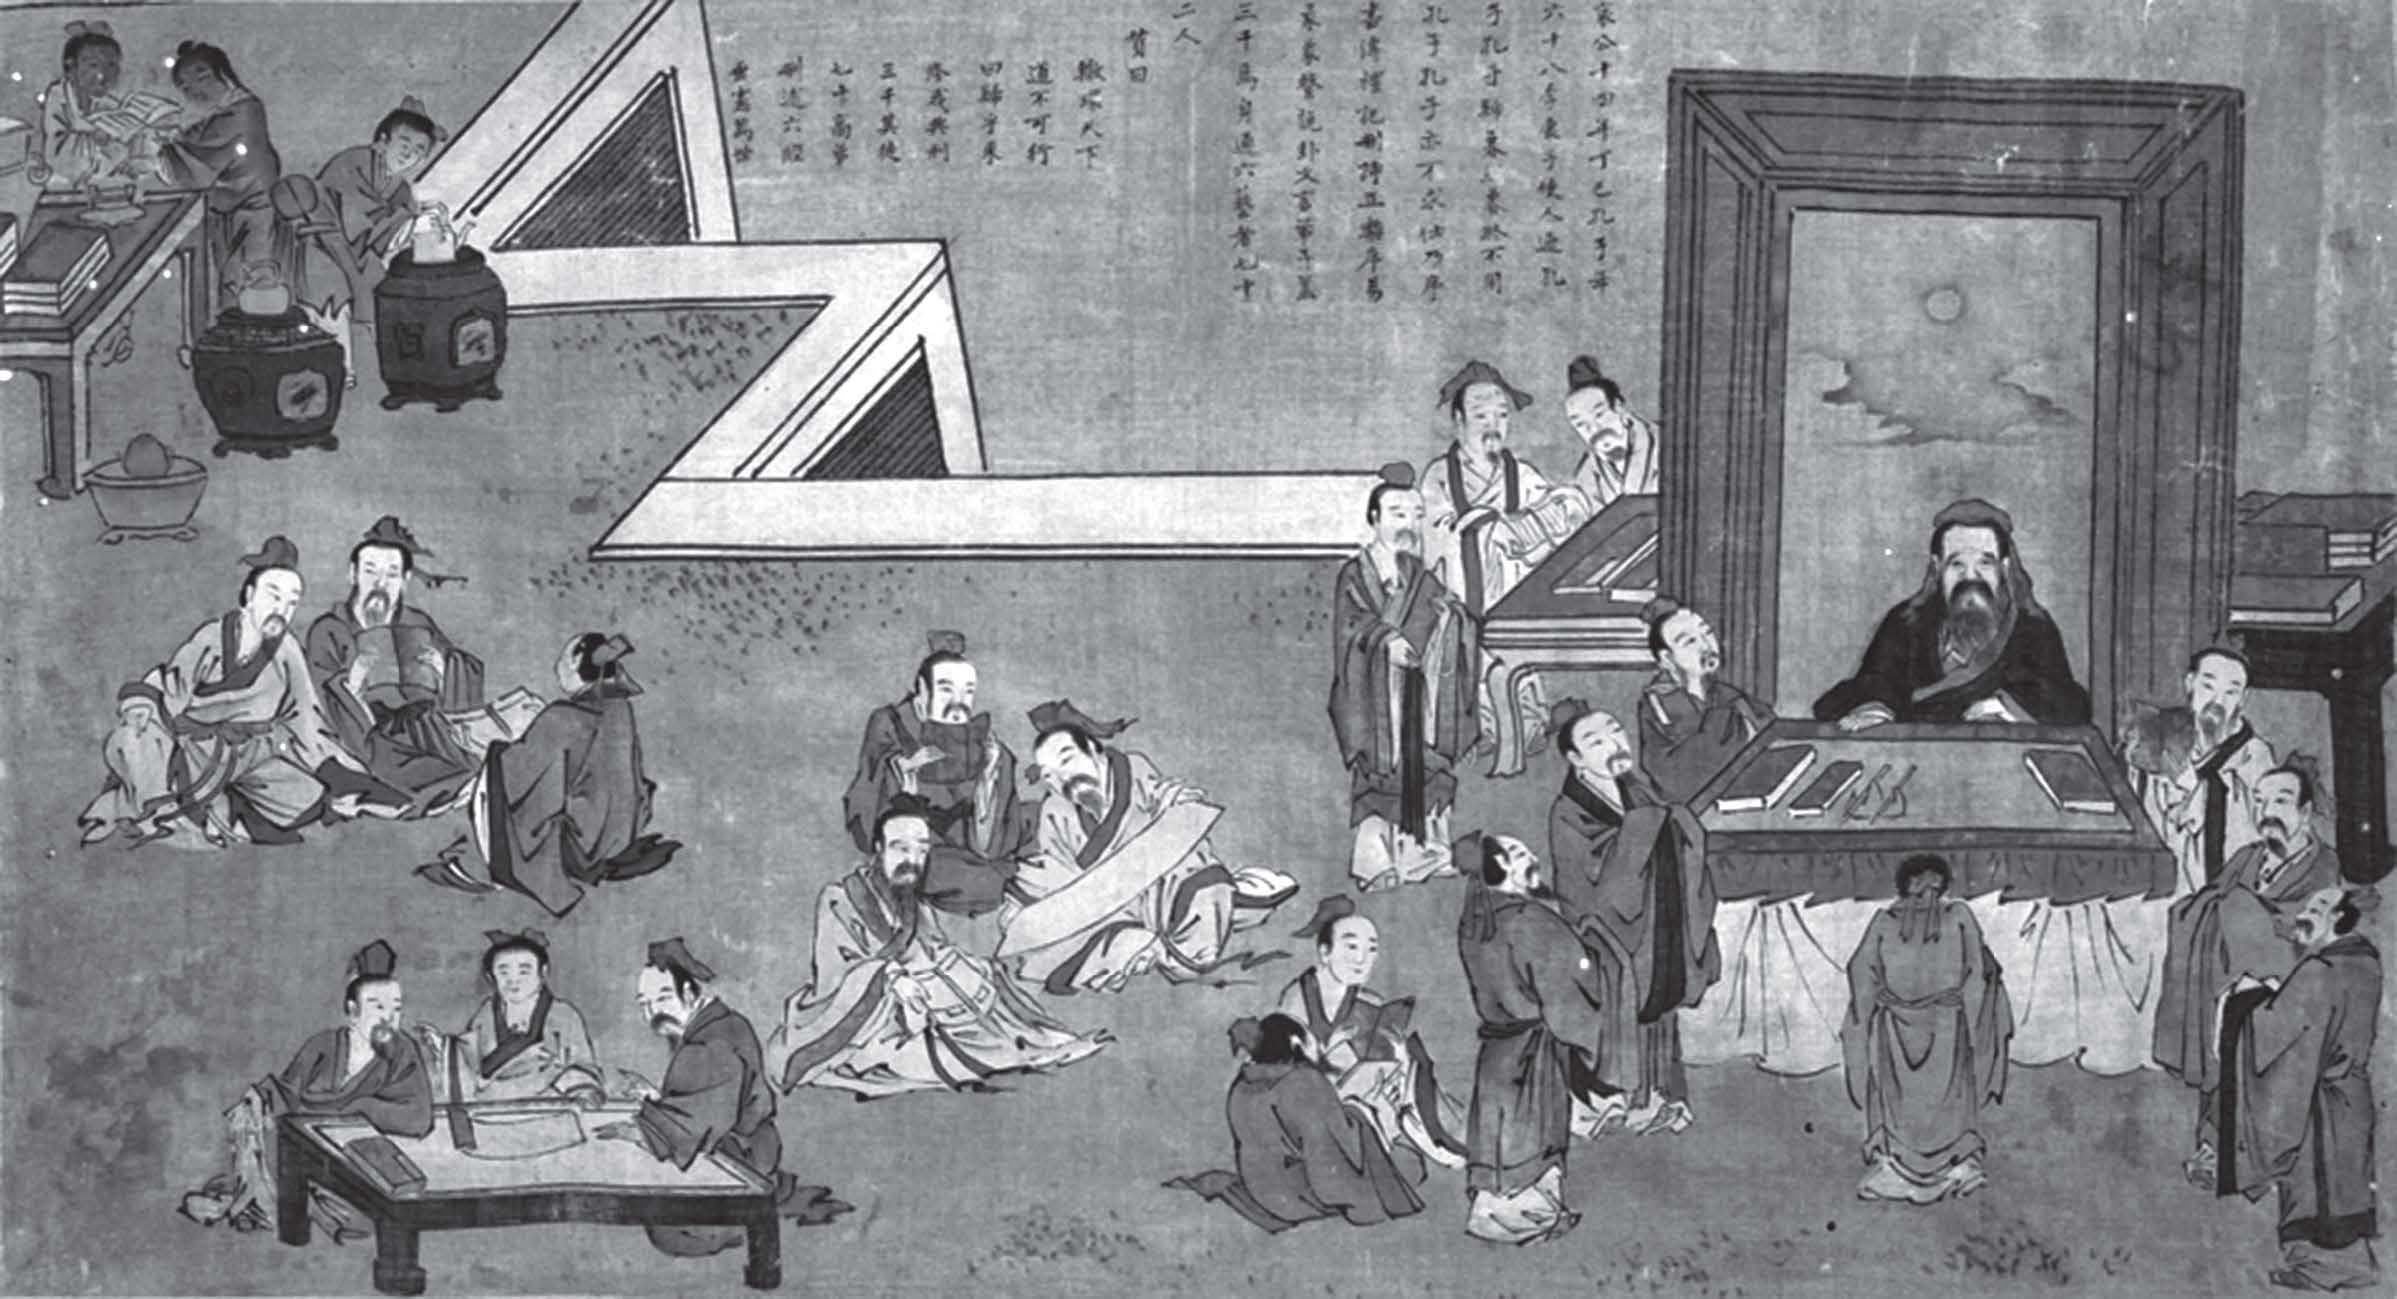 painting of several groups of people sitting together with scrolls, with one main person sitting behind a desk